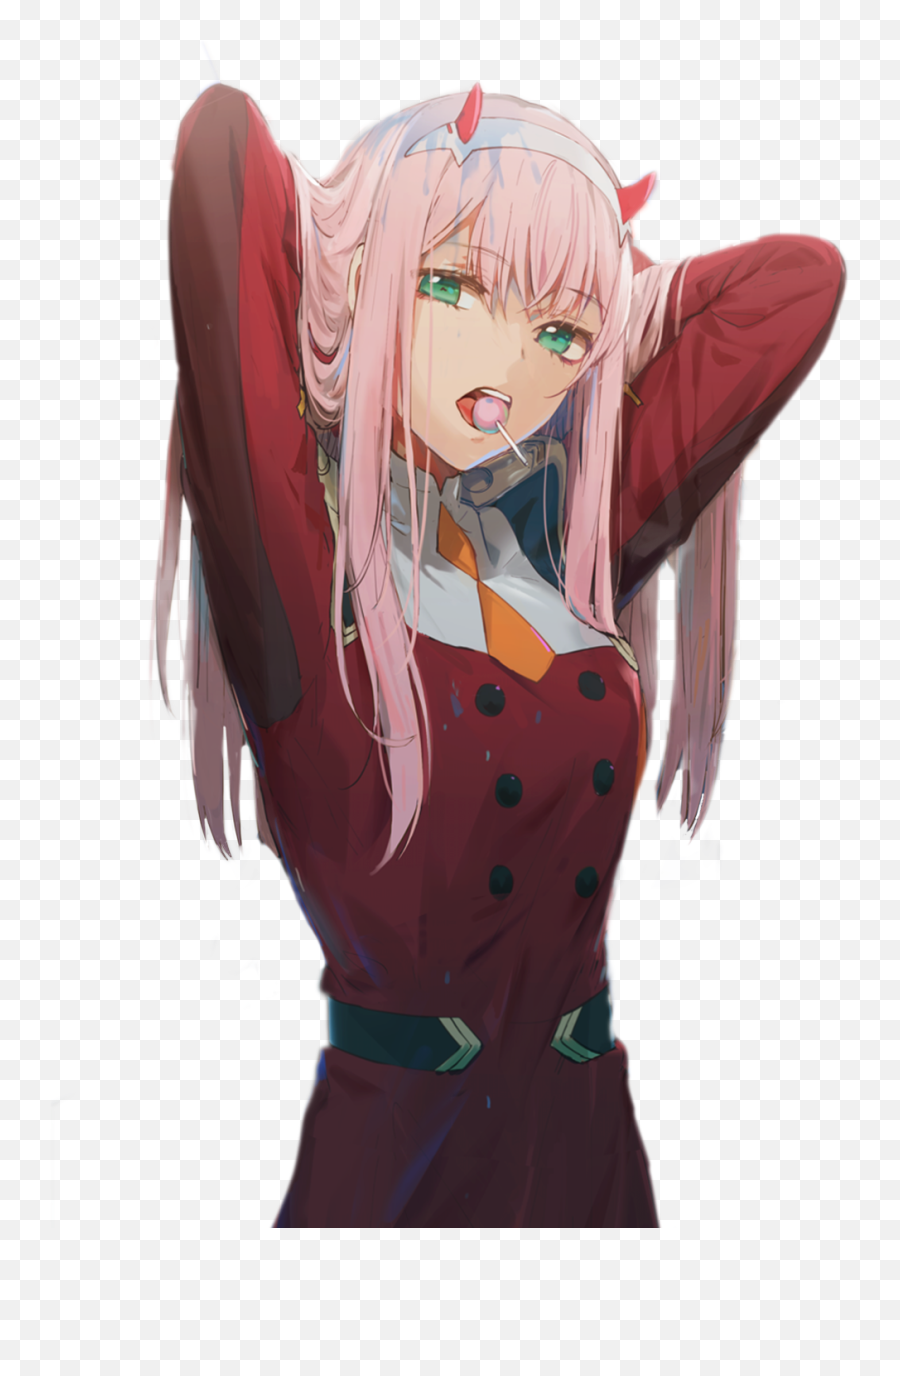 769 Darling In The Franxx Hd Wallpapers - Transparent Darling In The Franxx Png Emoji,Darling In The Franxx Logo